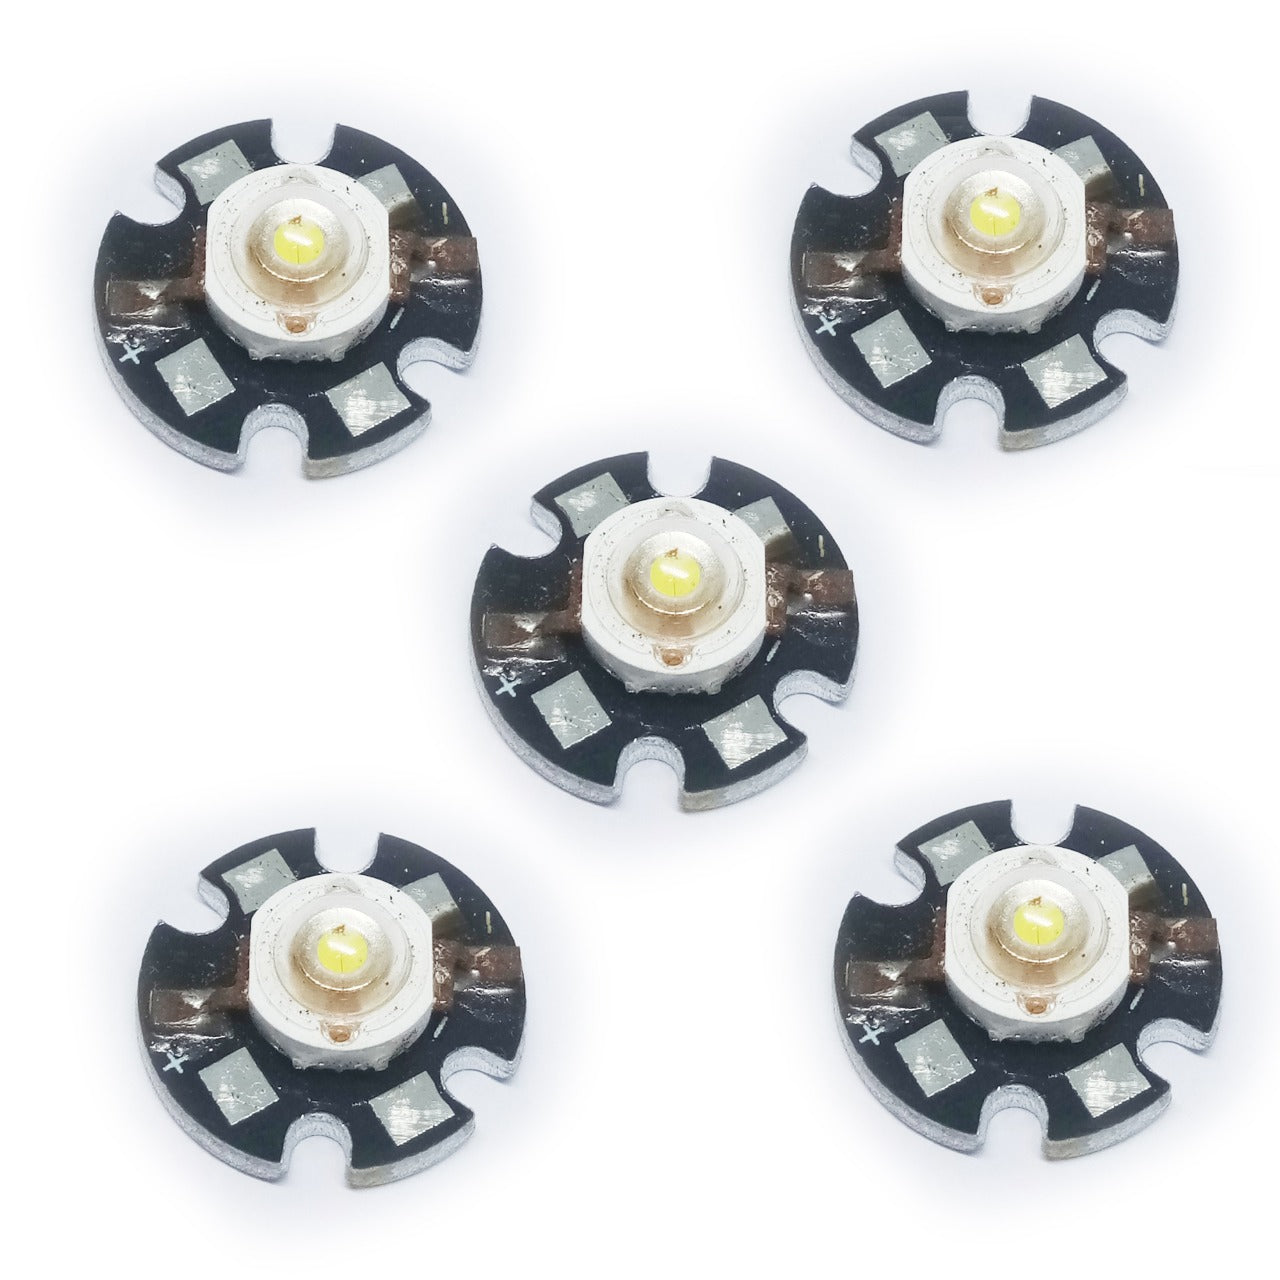 3W SMD LED White with Heat Sink High Power Bead Chips Bulb